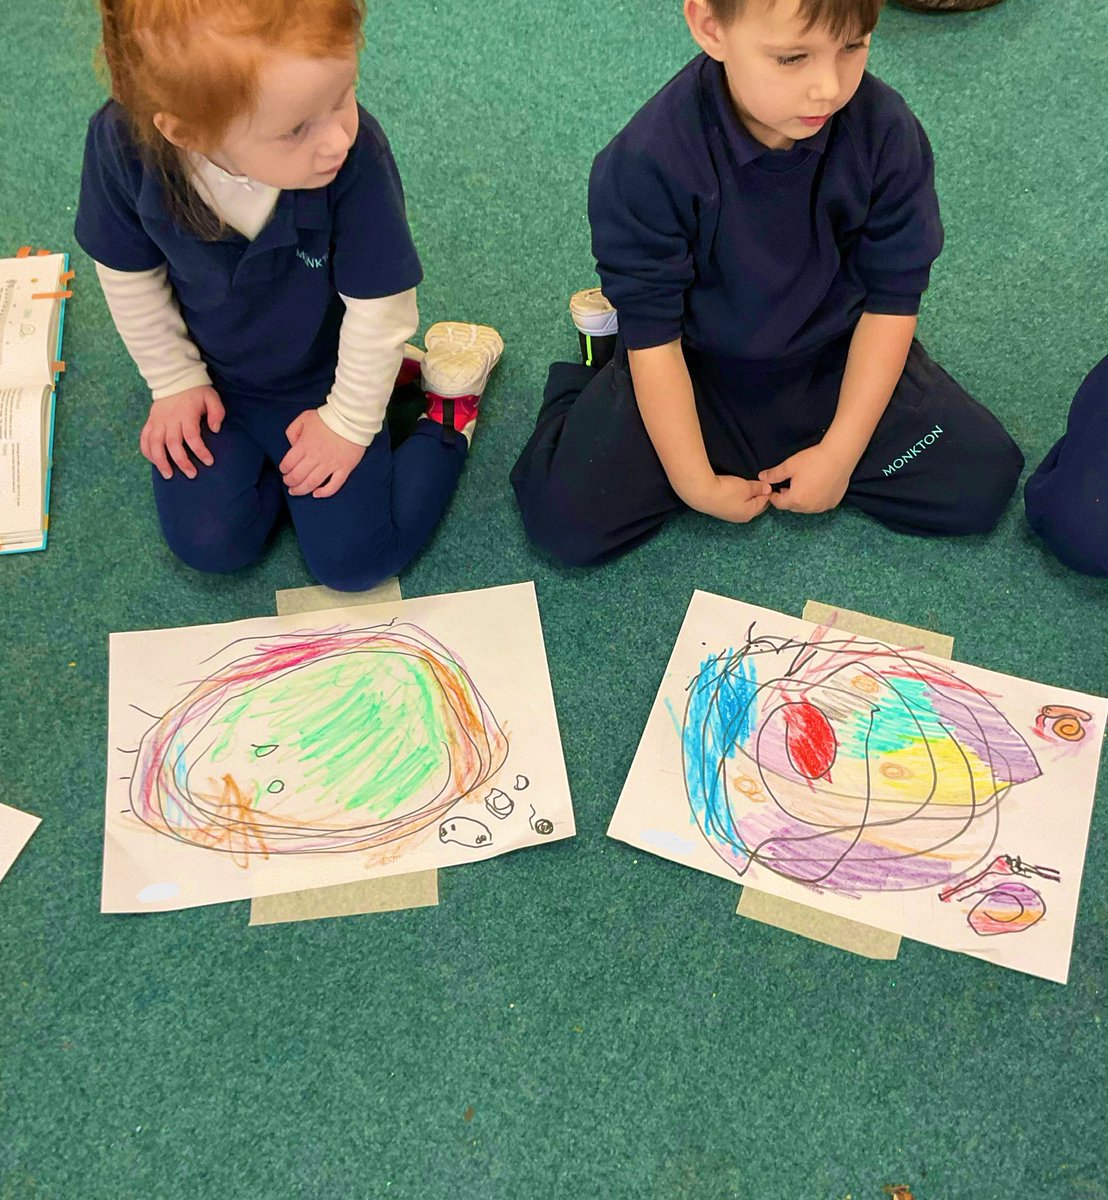 We drew our first character in Songdrawing session this week. 🐌 Mr Snail (and his family) had many different shapes and colours. He was unique on each child’s paper which we celebrated as we looked around to see each others’ creations. 😊 @LaulauLearnUK #MonktonKindergarten